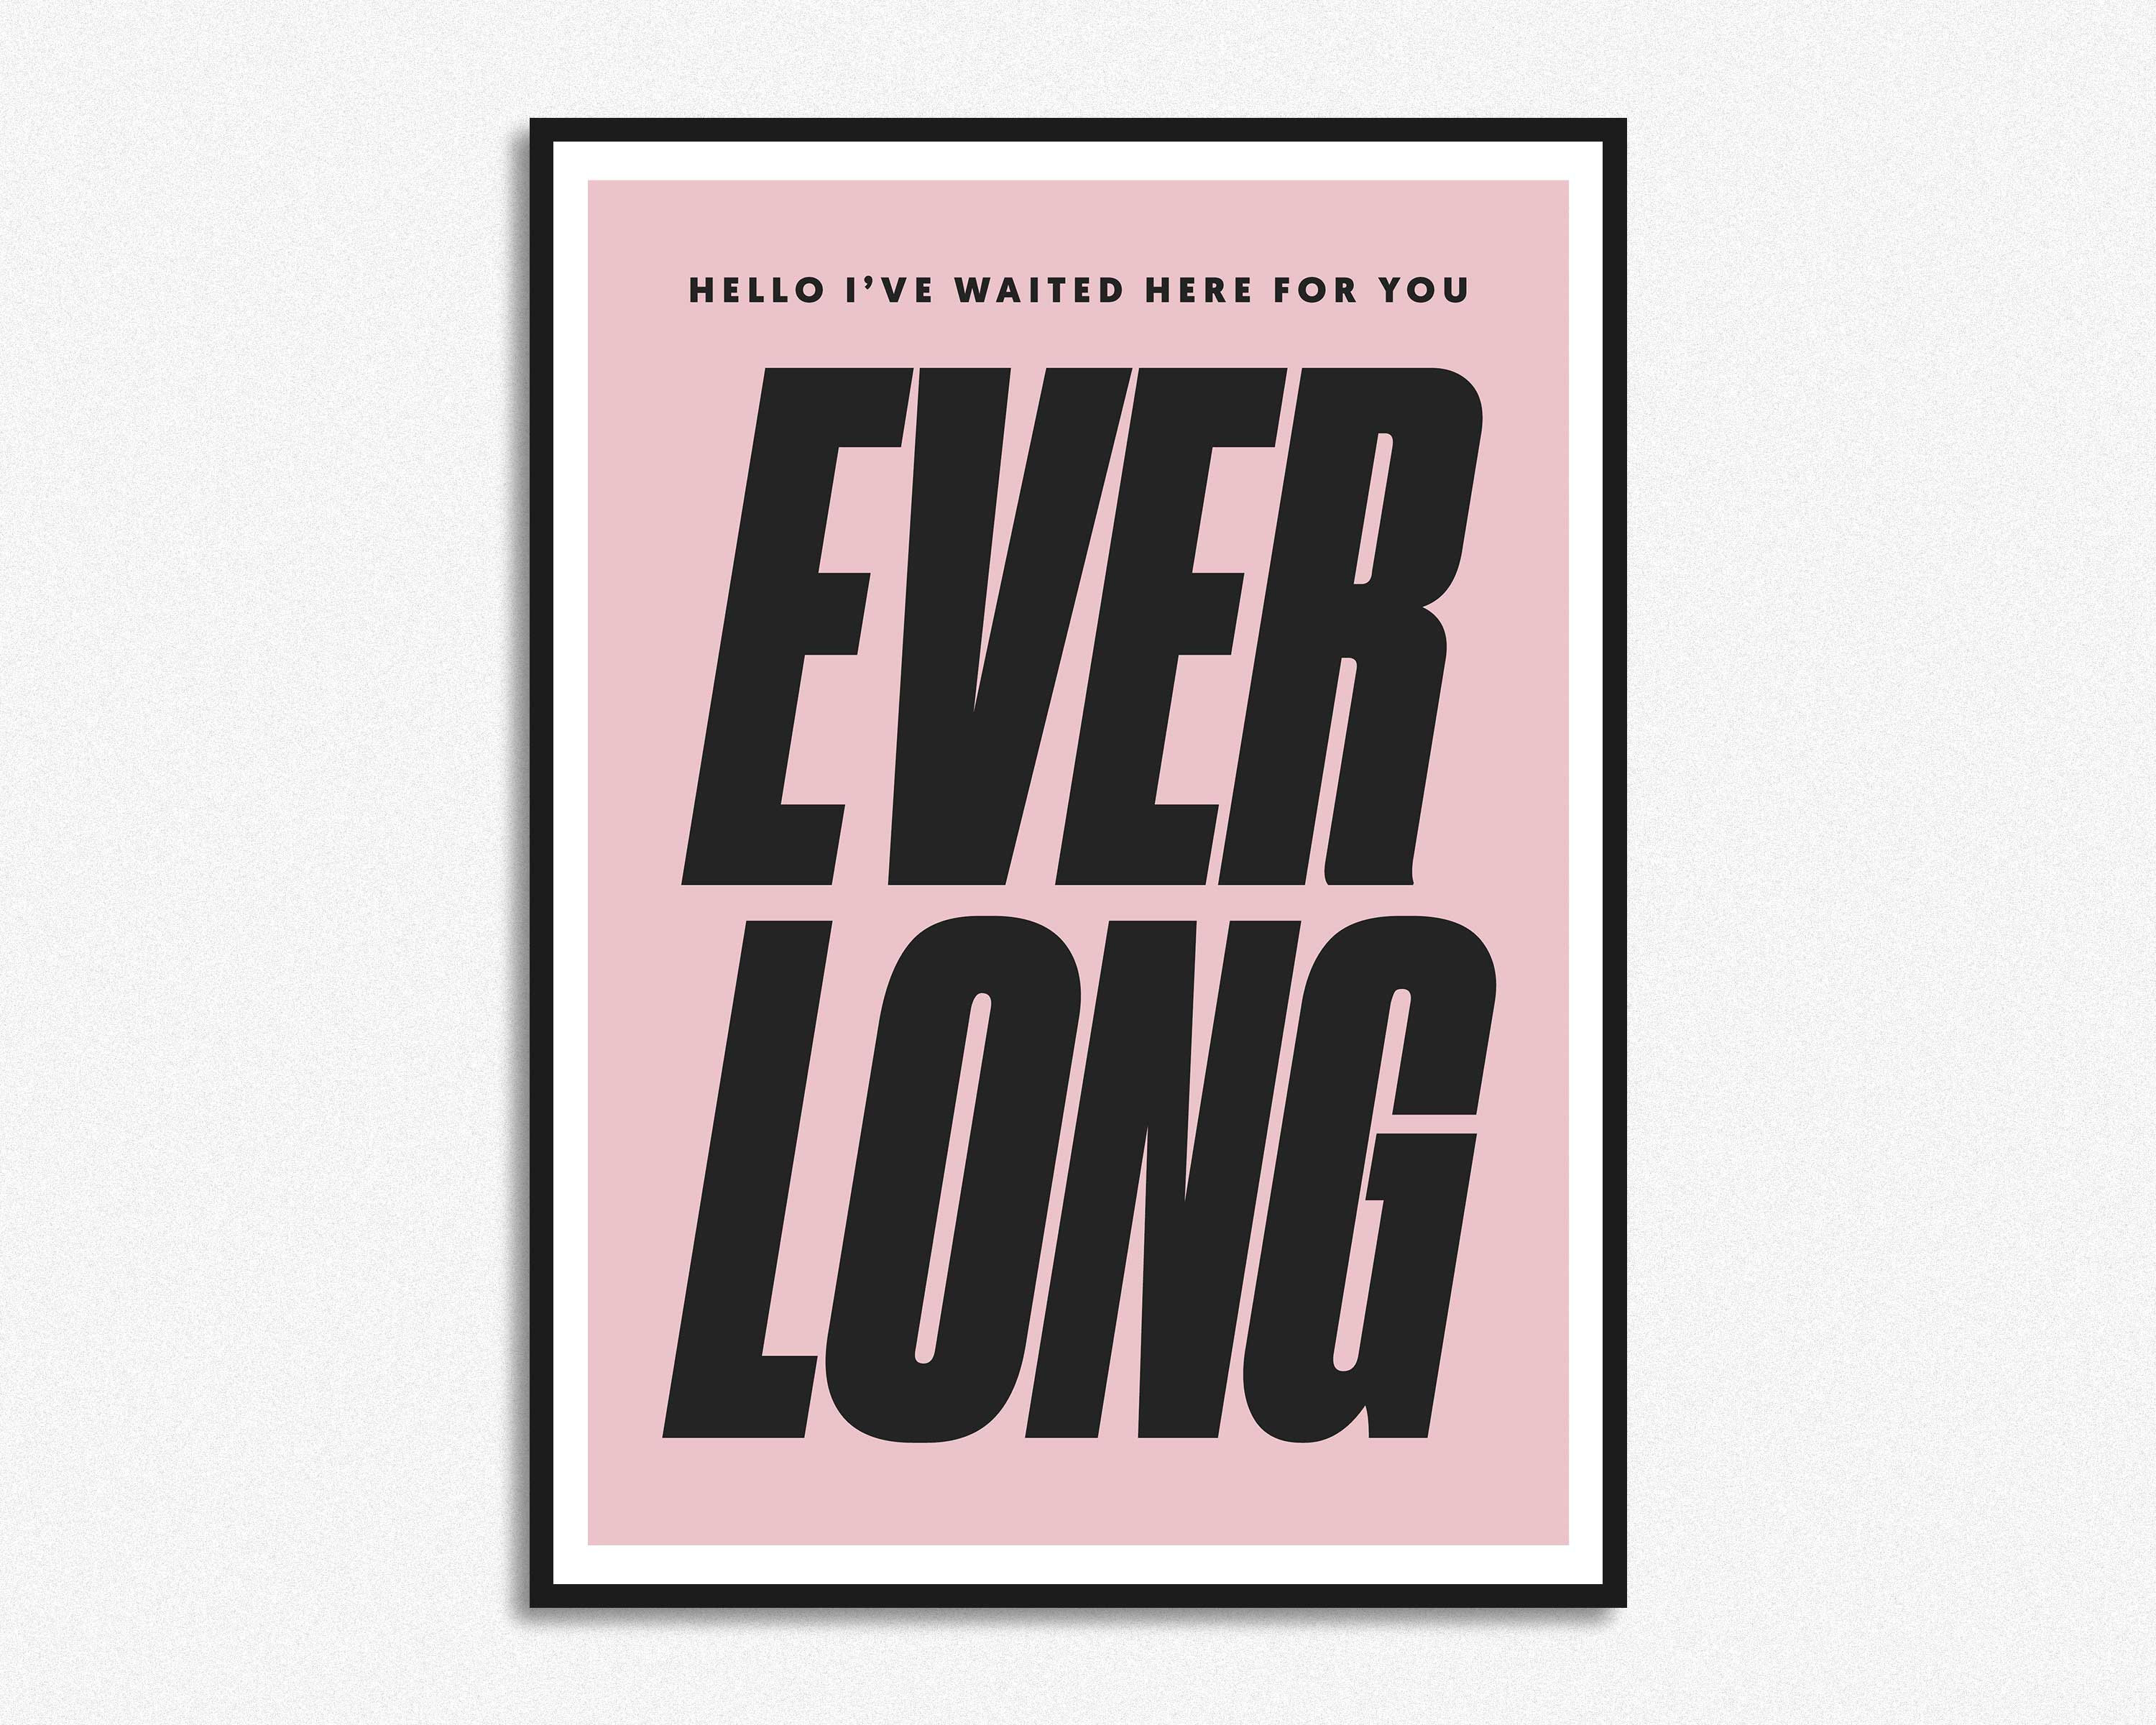 Everlong Foo Fighter Lyrics Print Available in a Variety of 